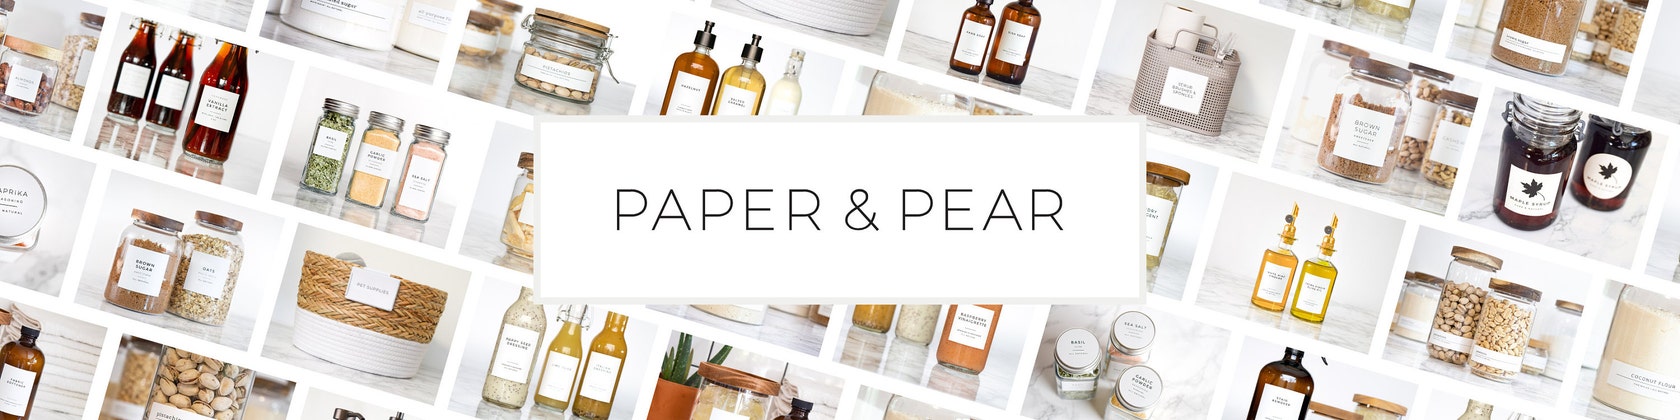 Classic Spice Labels – Paper & Pear